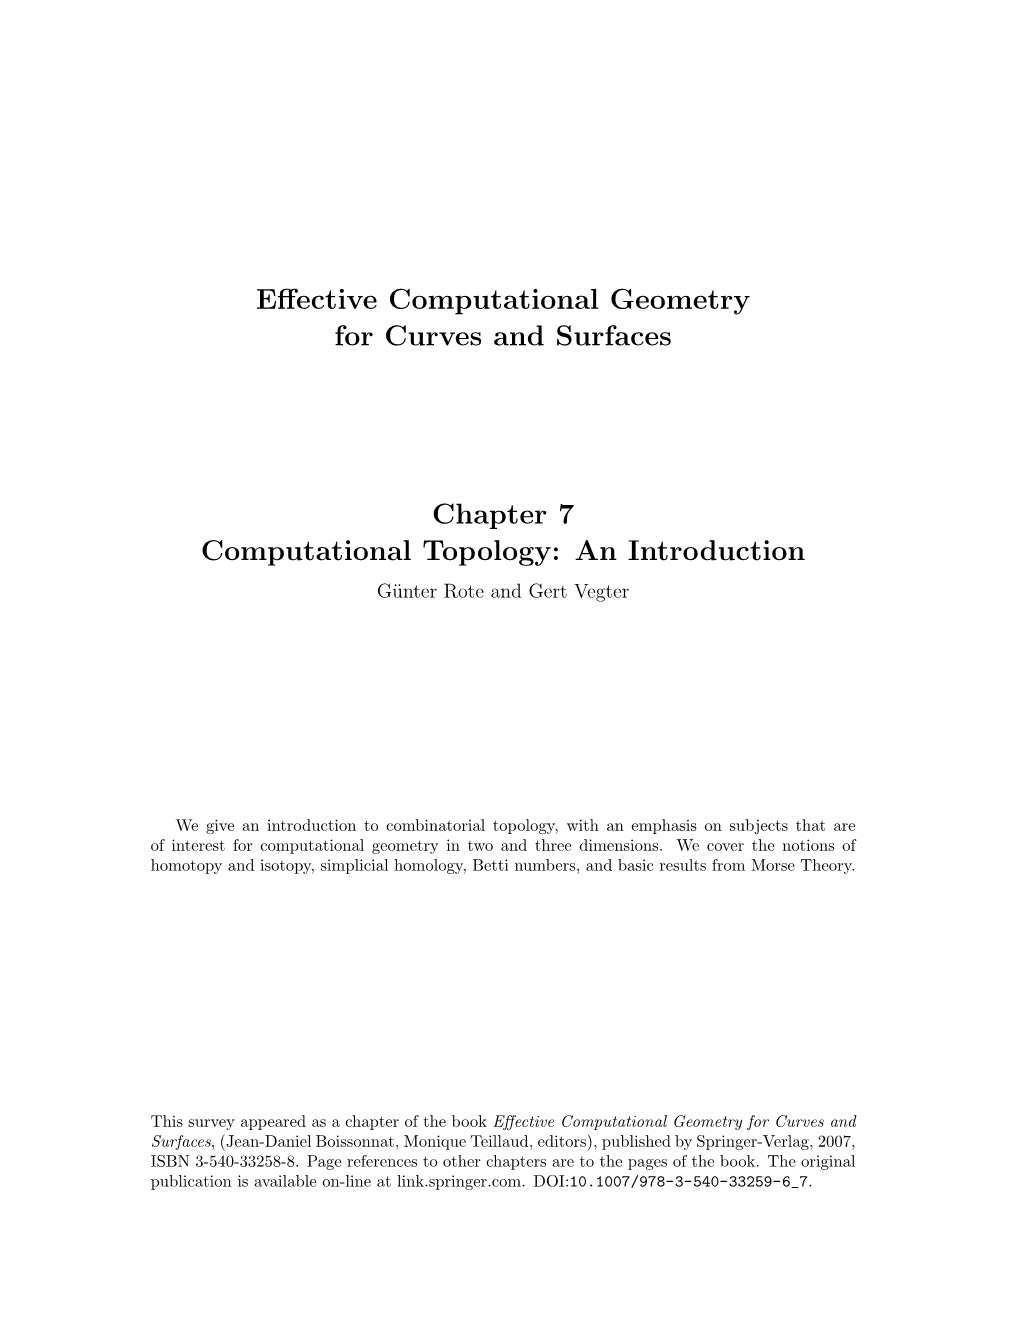 Computational Topology: an Introduction G¨Unter Rote and Gert Vegter